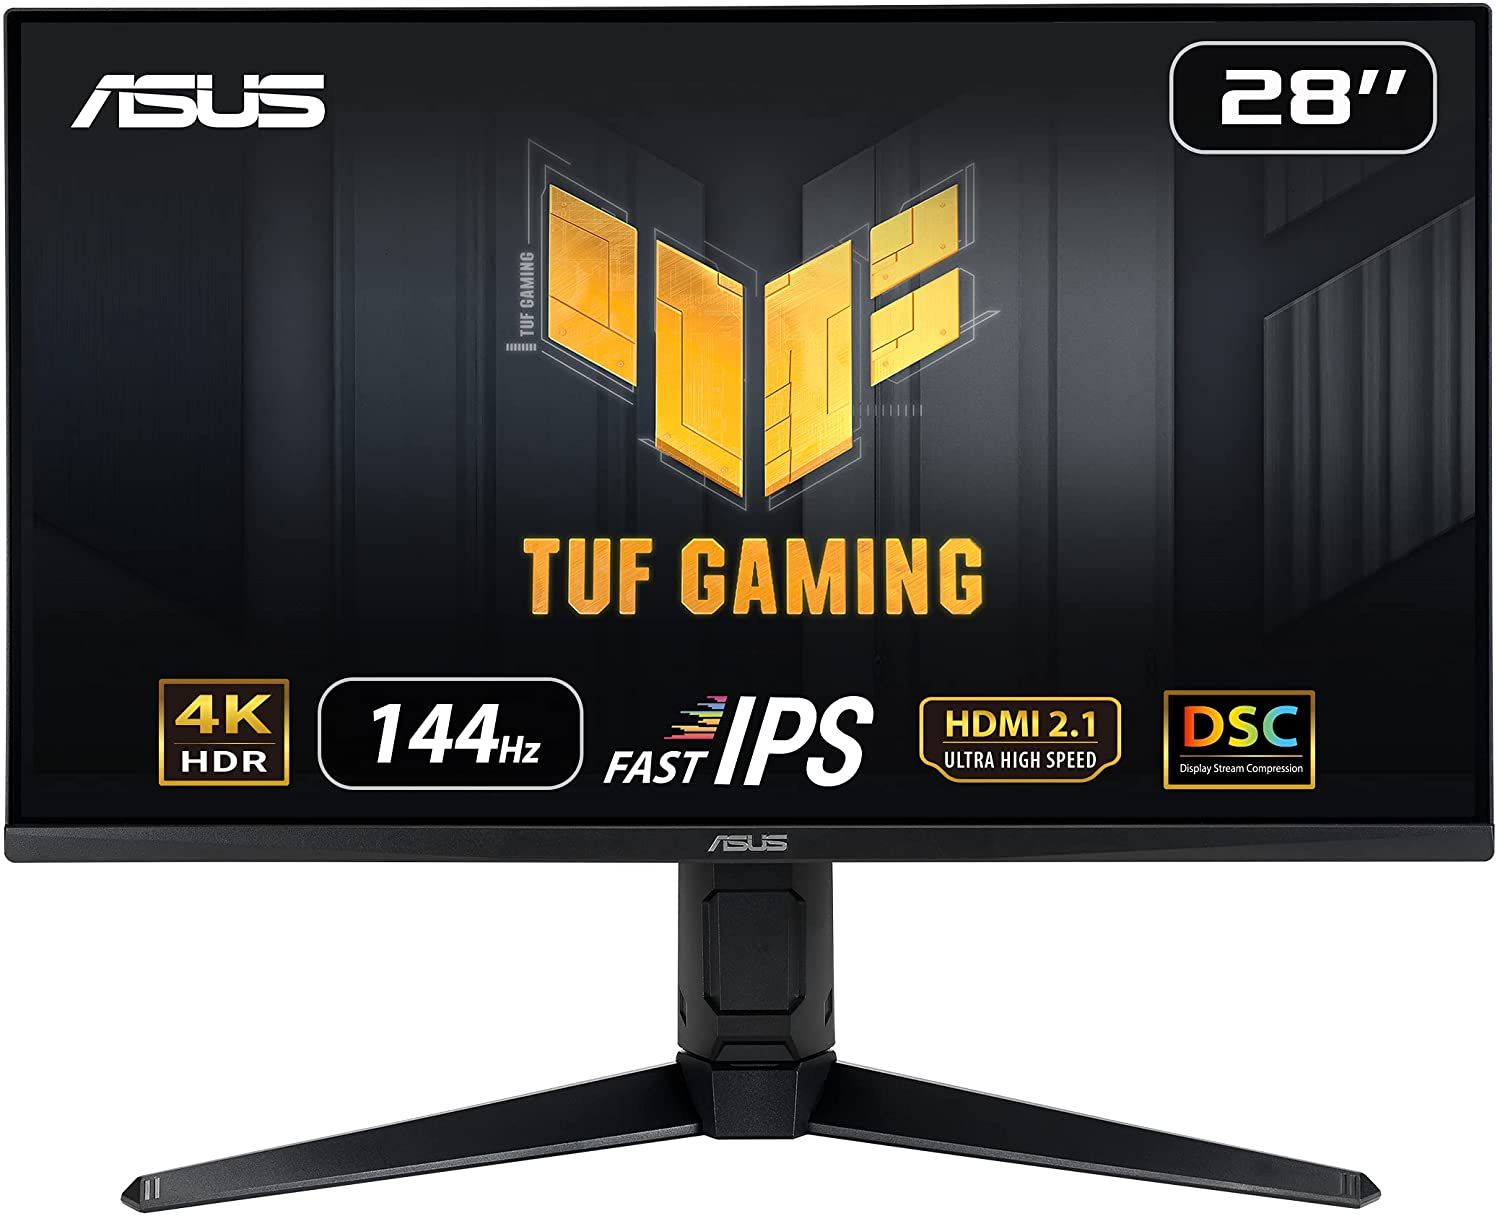 ASUS TUF Gaming VG28UQL1A product image of a black monitor with yellow ASUS TUF branding on the display.